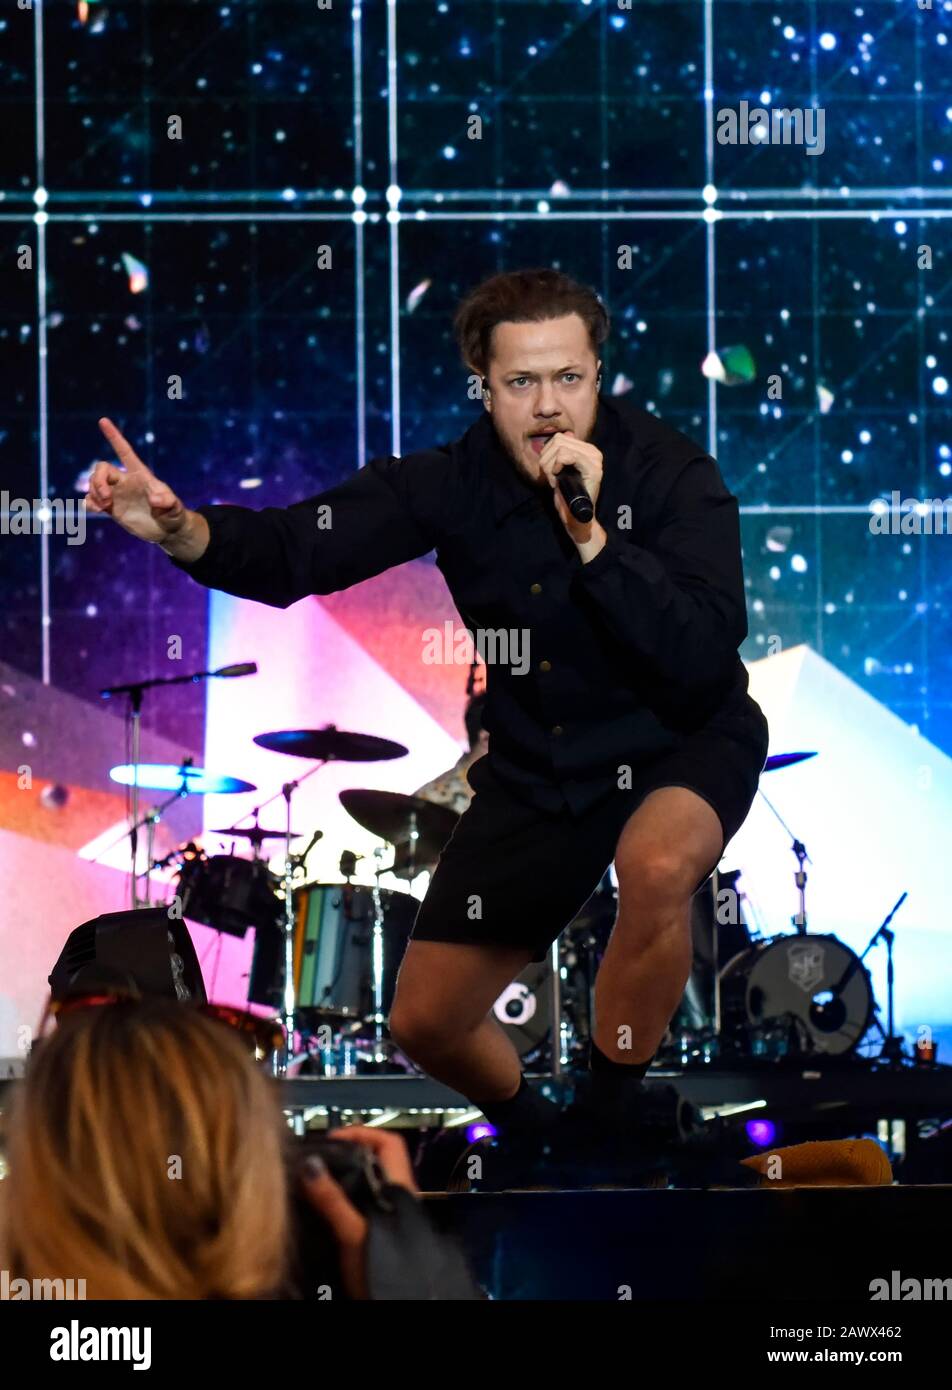 Napa, California, May 24, 2019, Imagine Dragons on stage at the 2019 Bottle Rock Festival, Day 1 BottleRock Credit: Ken Howard/Alamy Stock Photo